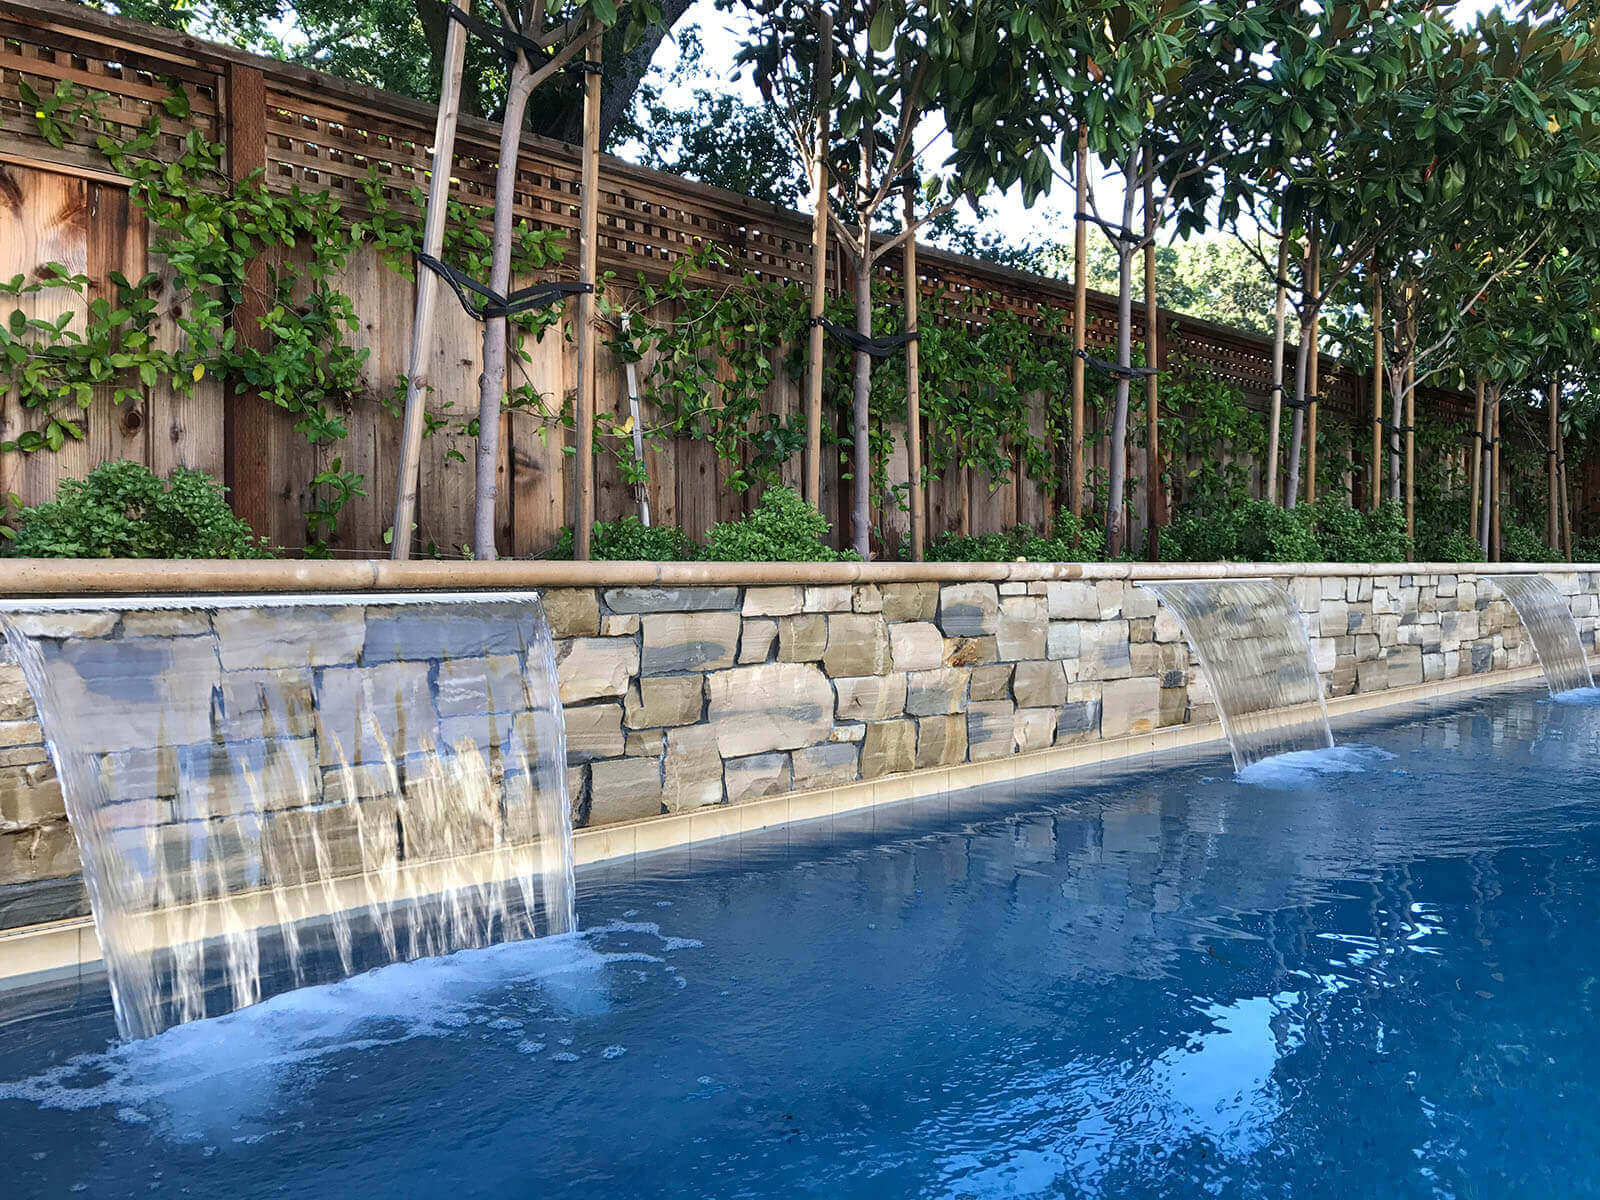 Lap pool with sheer descent falls, vine-covered wooden fencing and young trees